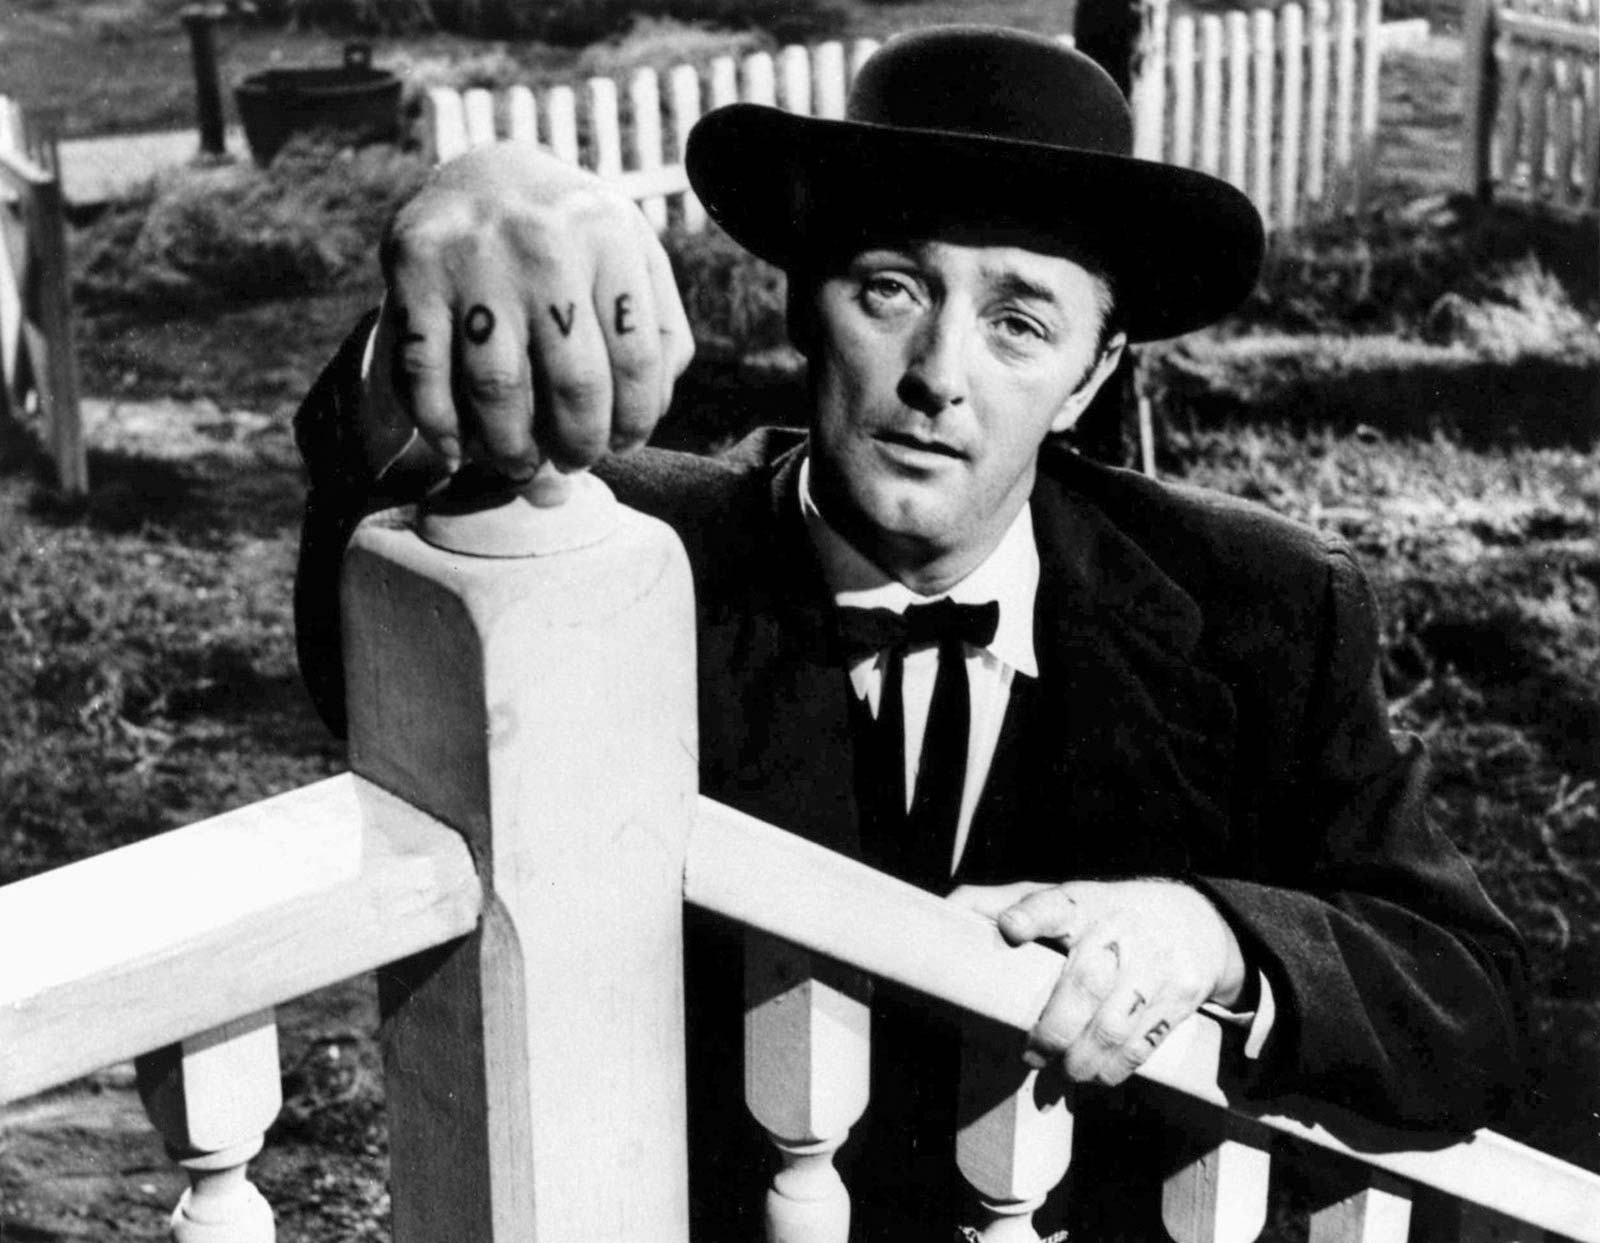 Only a Film Buff Can Name 14 ️ Top Movies from the 1950s Quiz The Night Of The Hunter